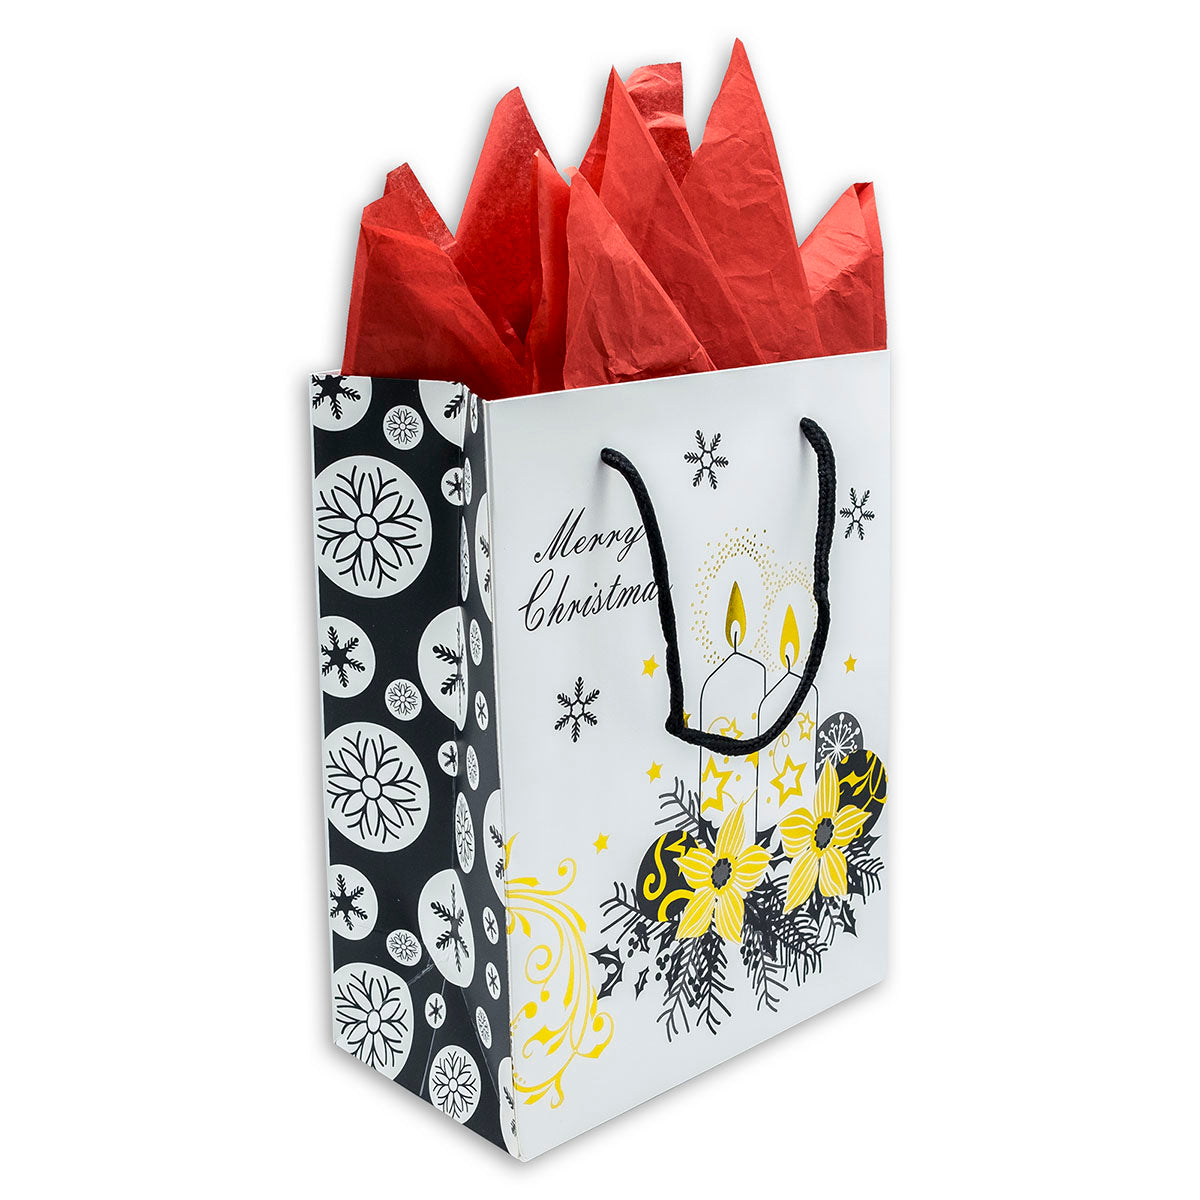 Premium Christmas Candle Holiday Gift Bags (12-Pack)